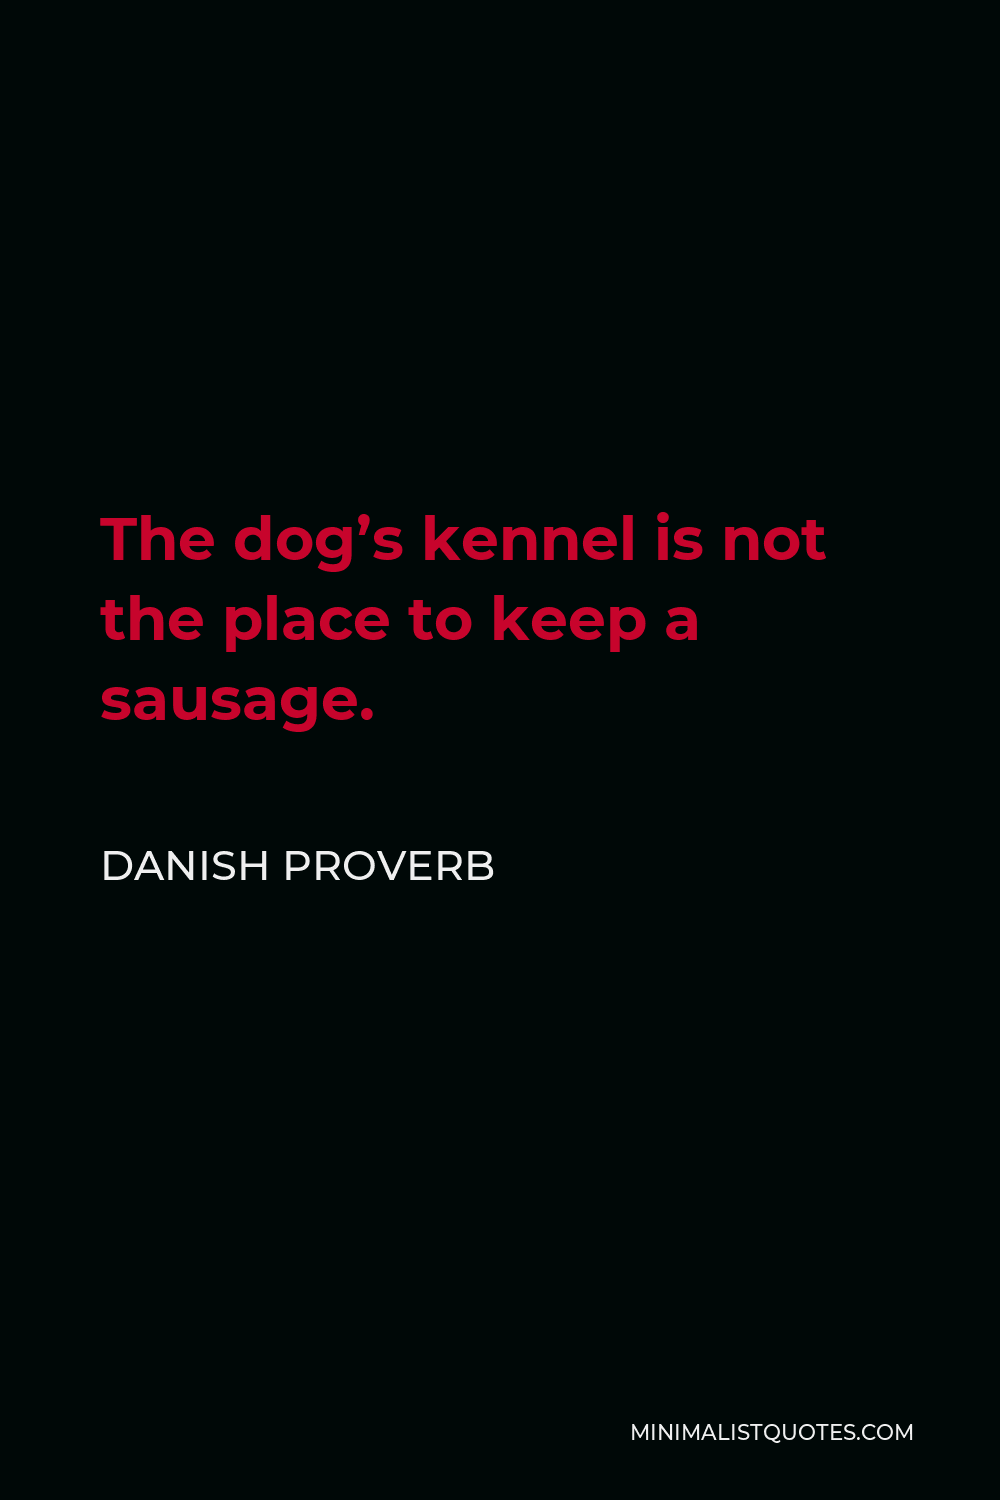 Danish Proverb Quote - The dog’s kennel is not the place to keep a sausage.